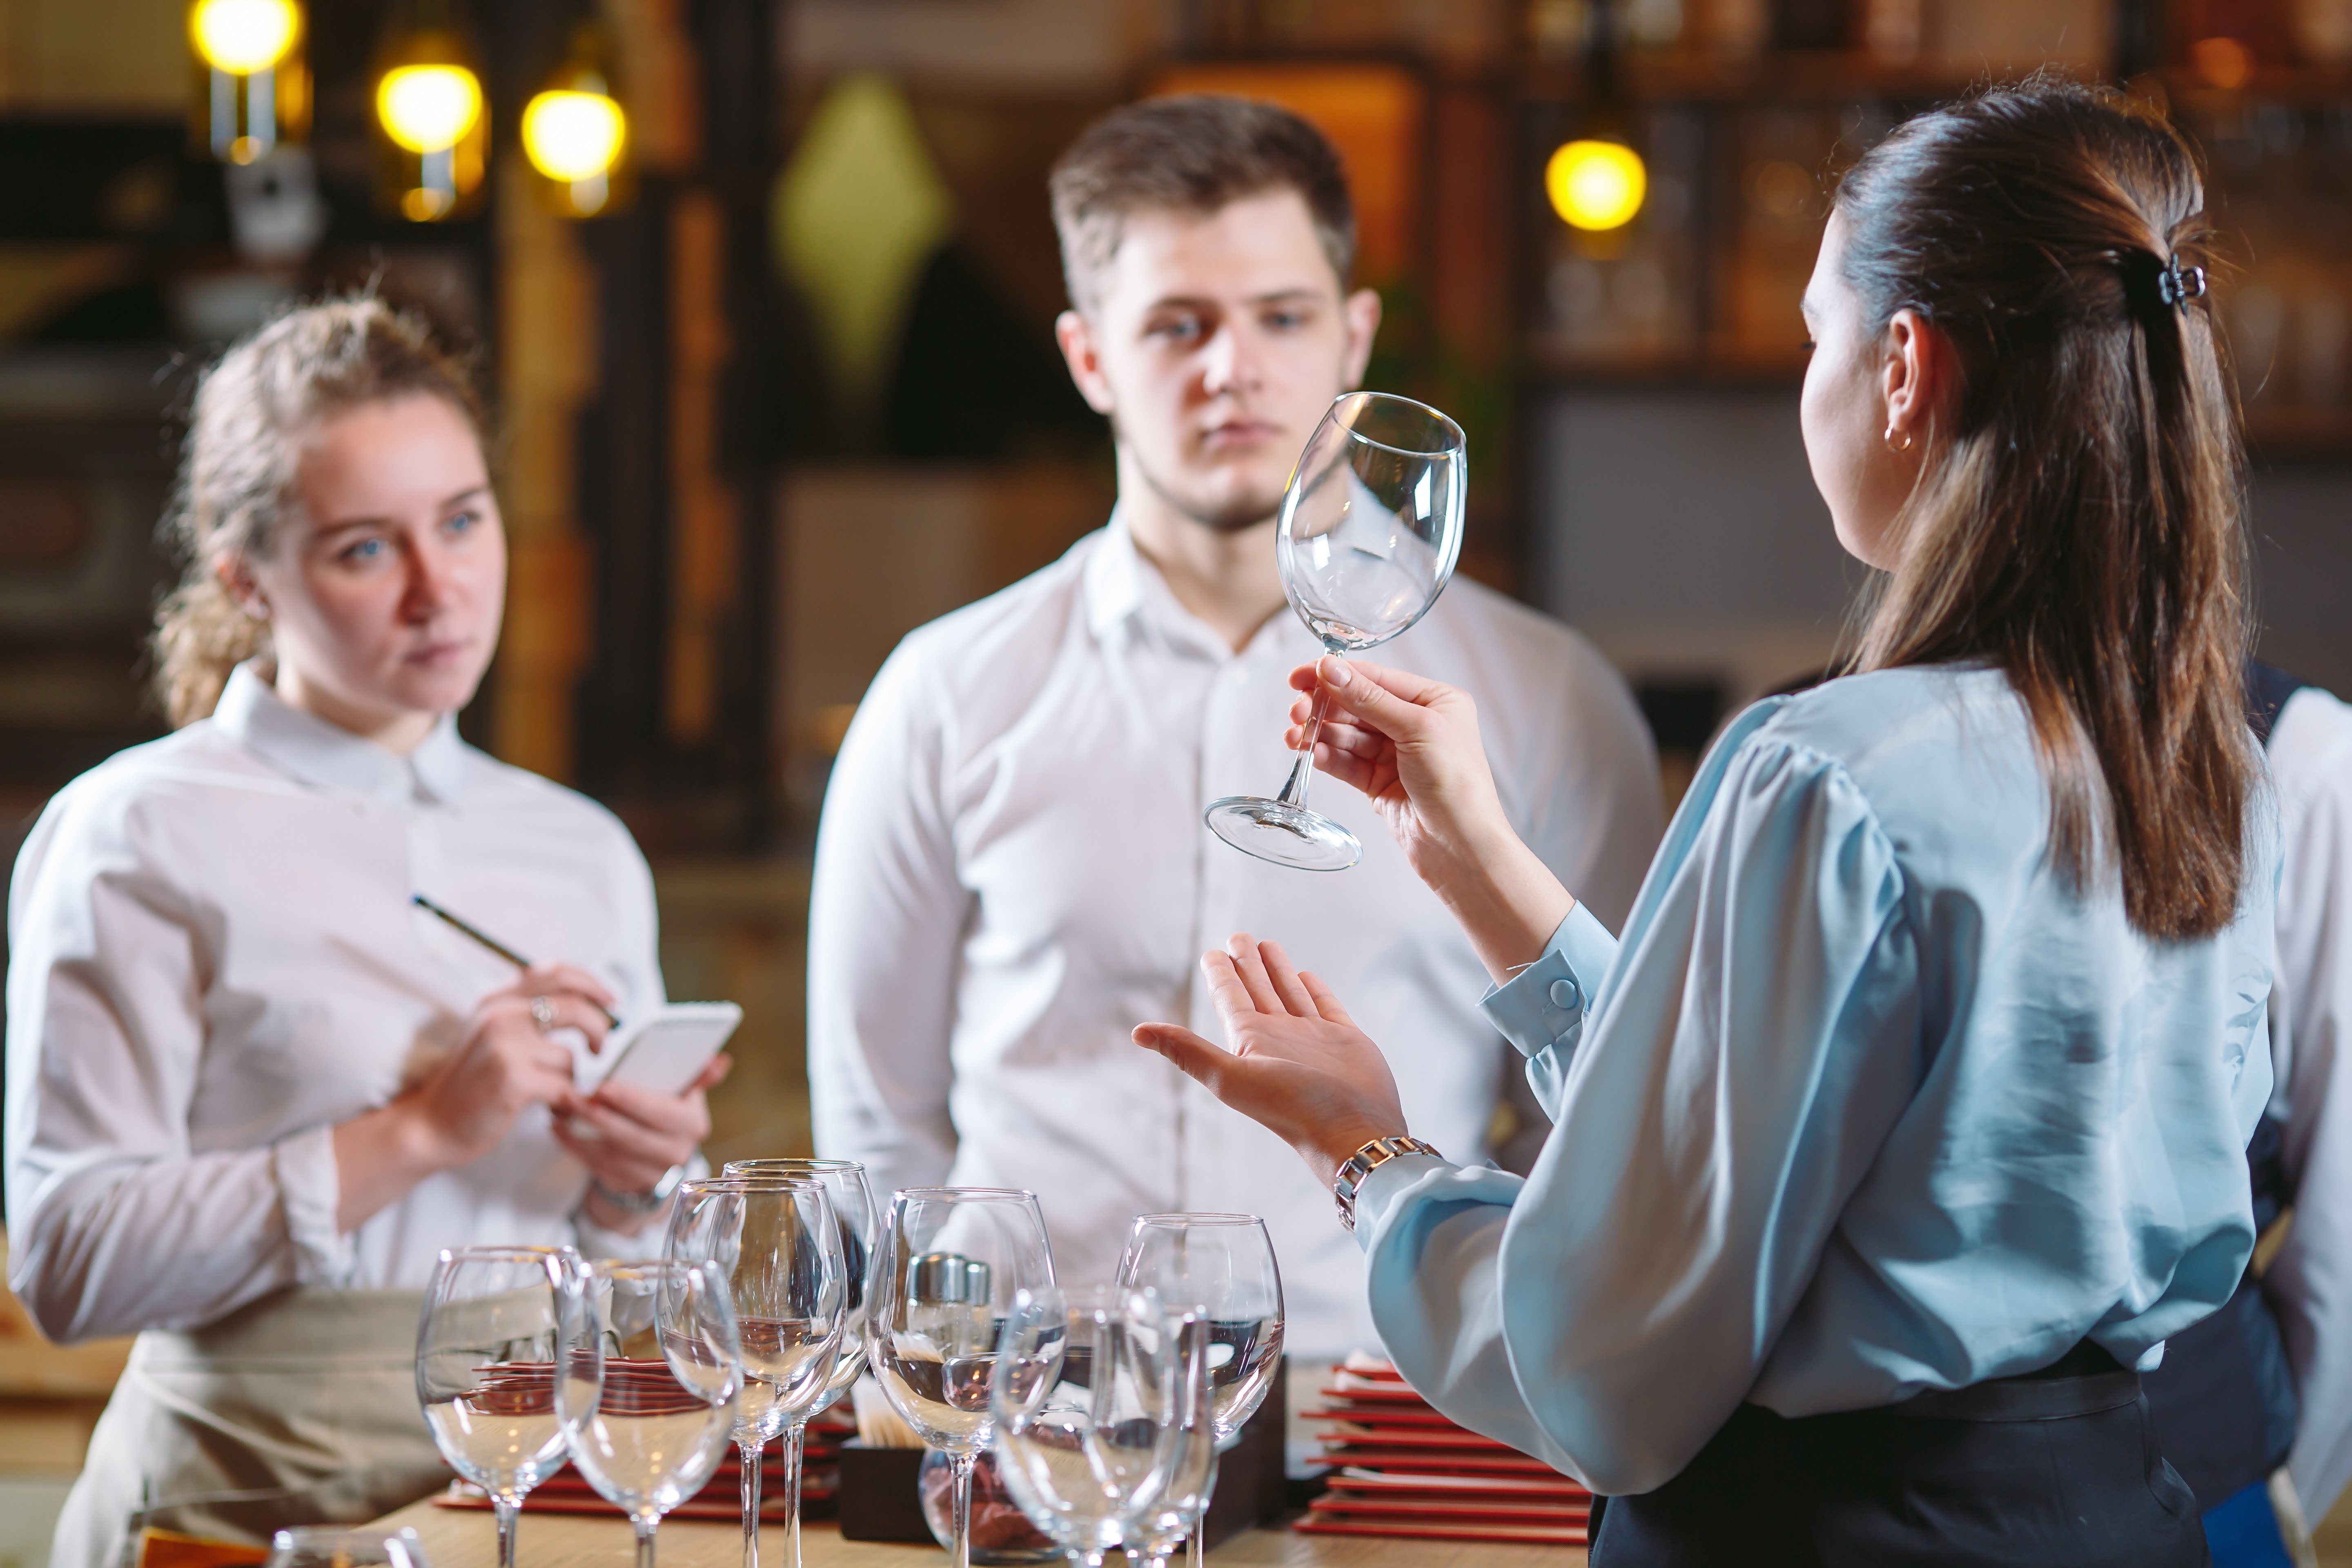 How to Improve Restaurant Service Quality: 10 Methods | ResDiary